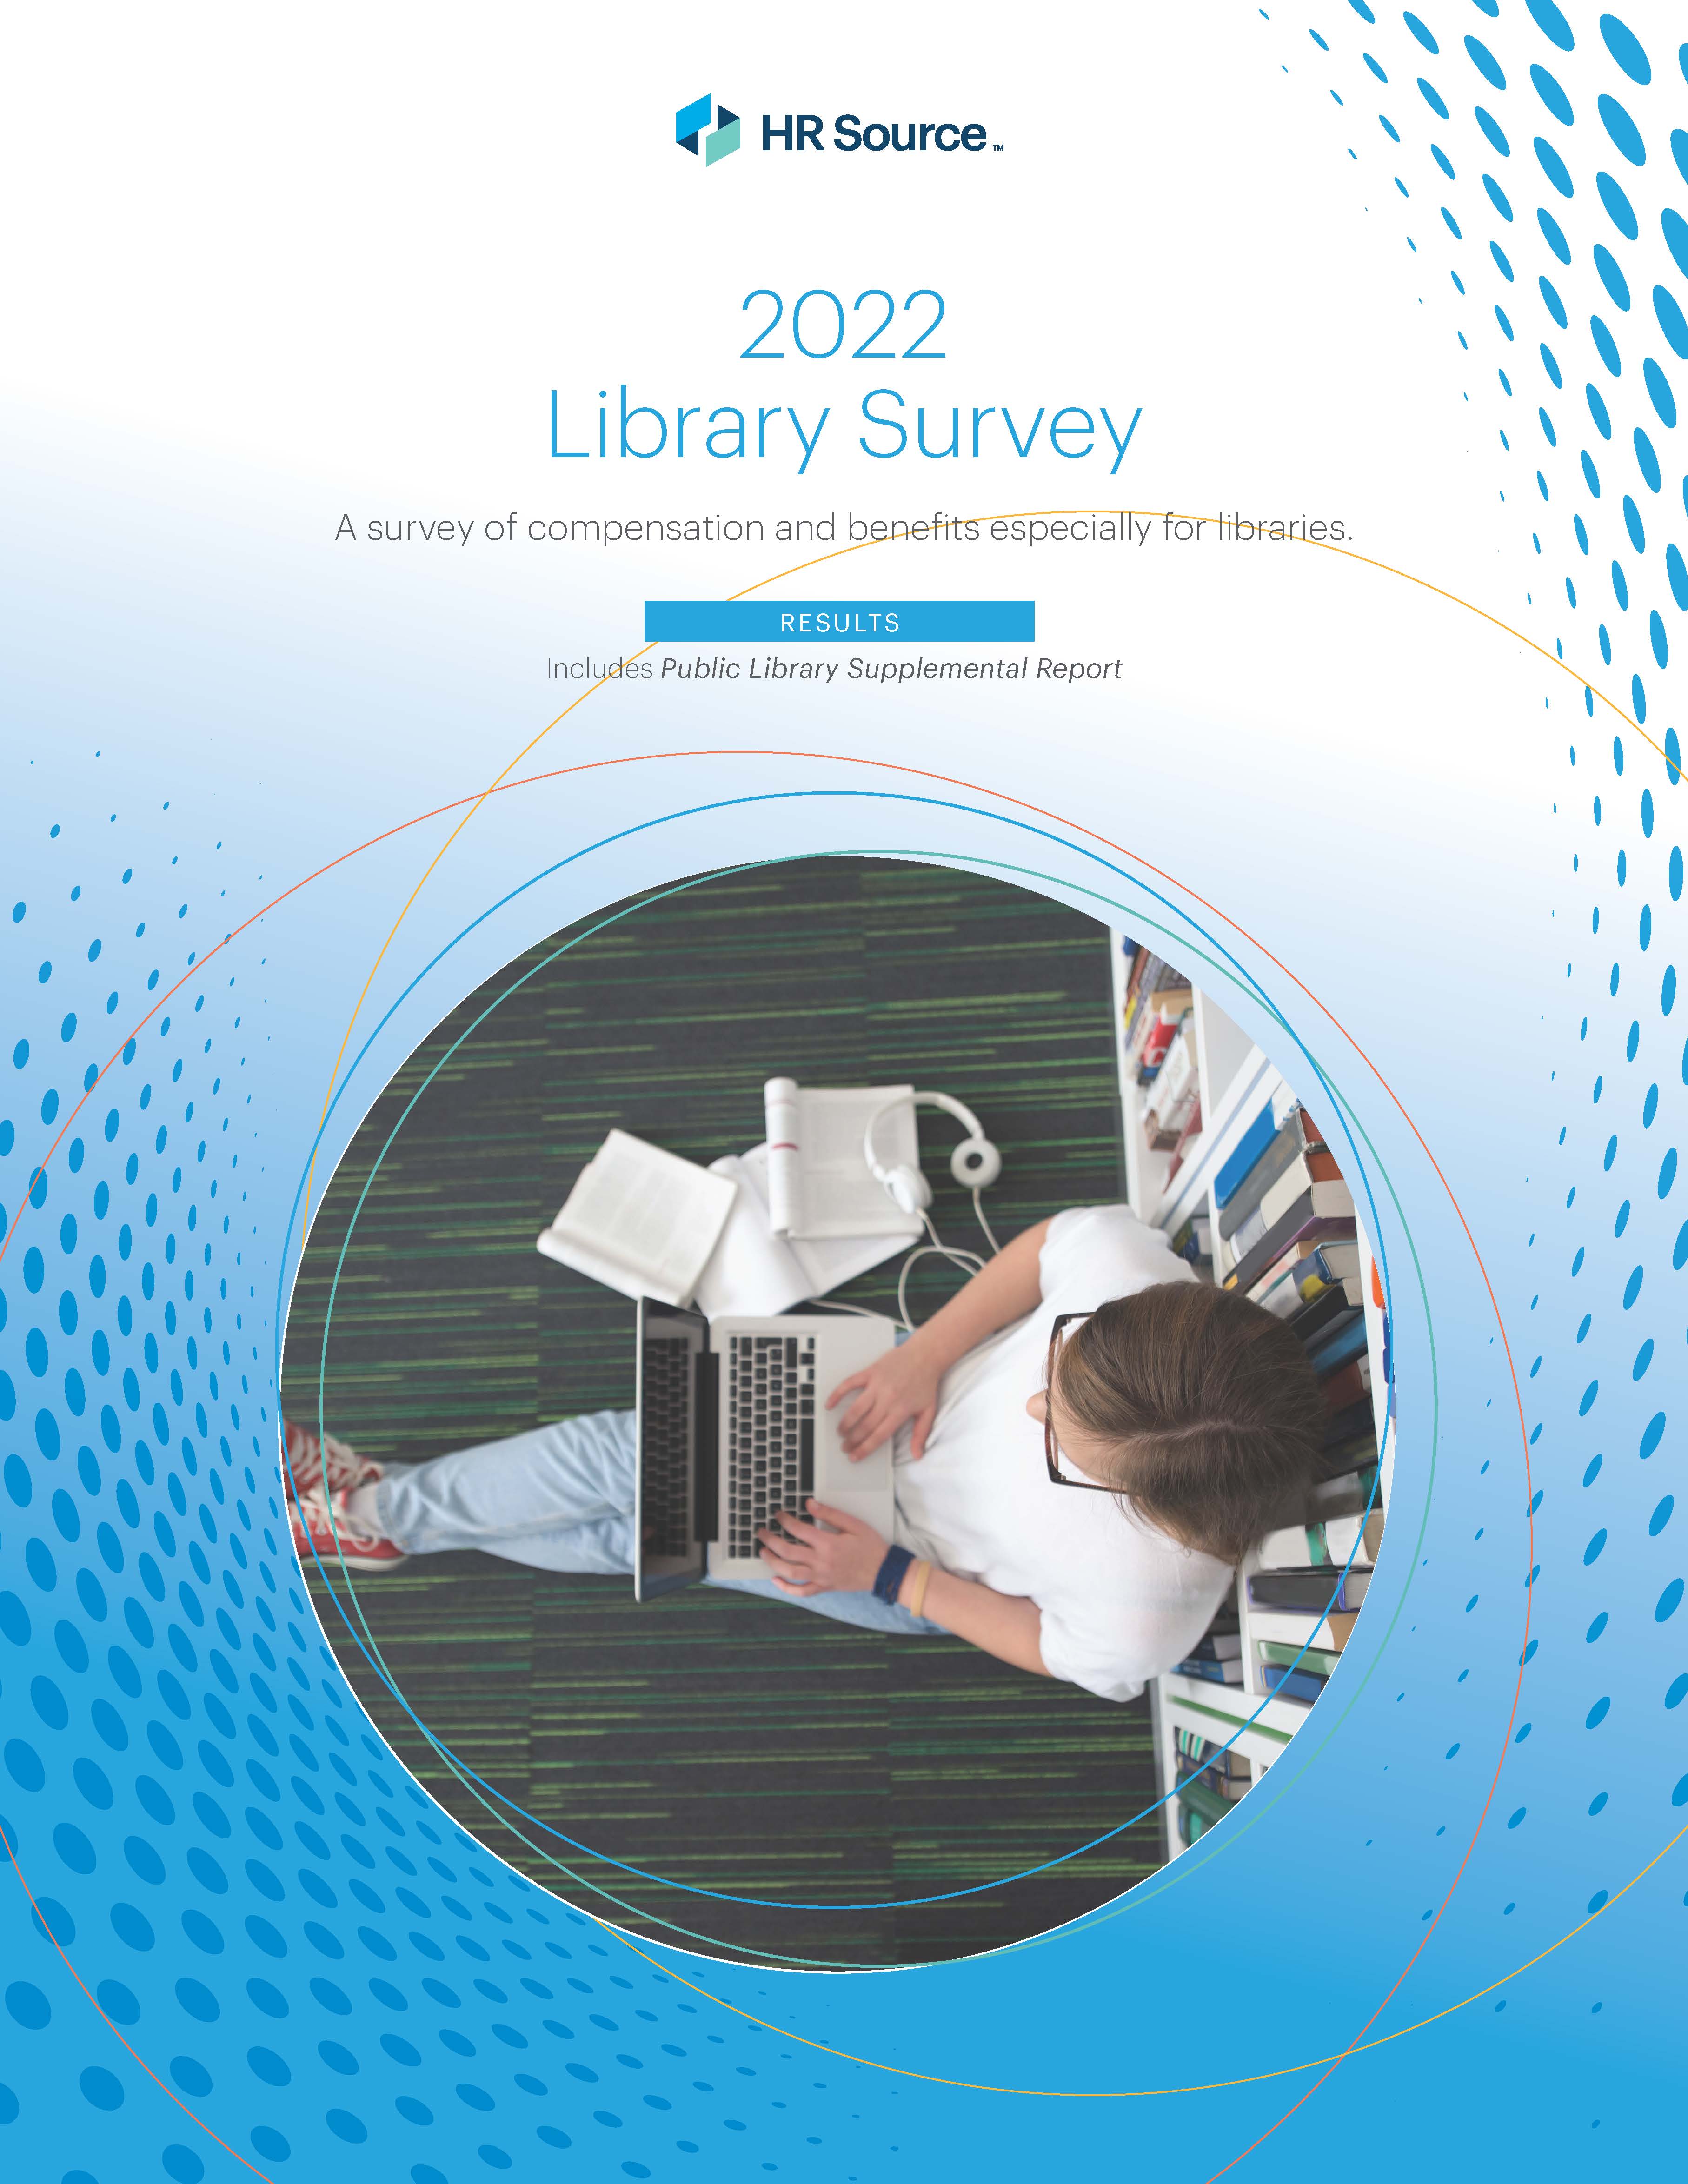 Public Library Supplemental Report 2022